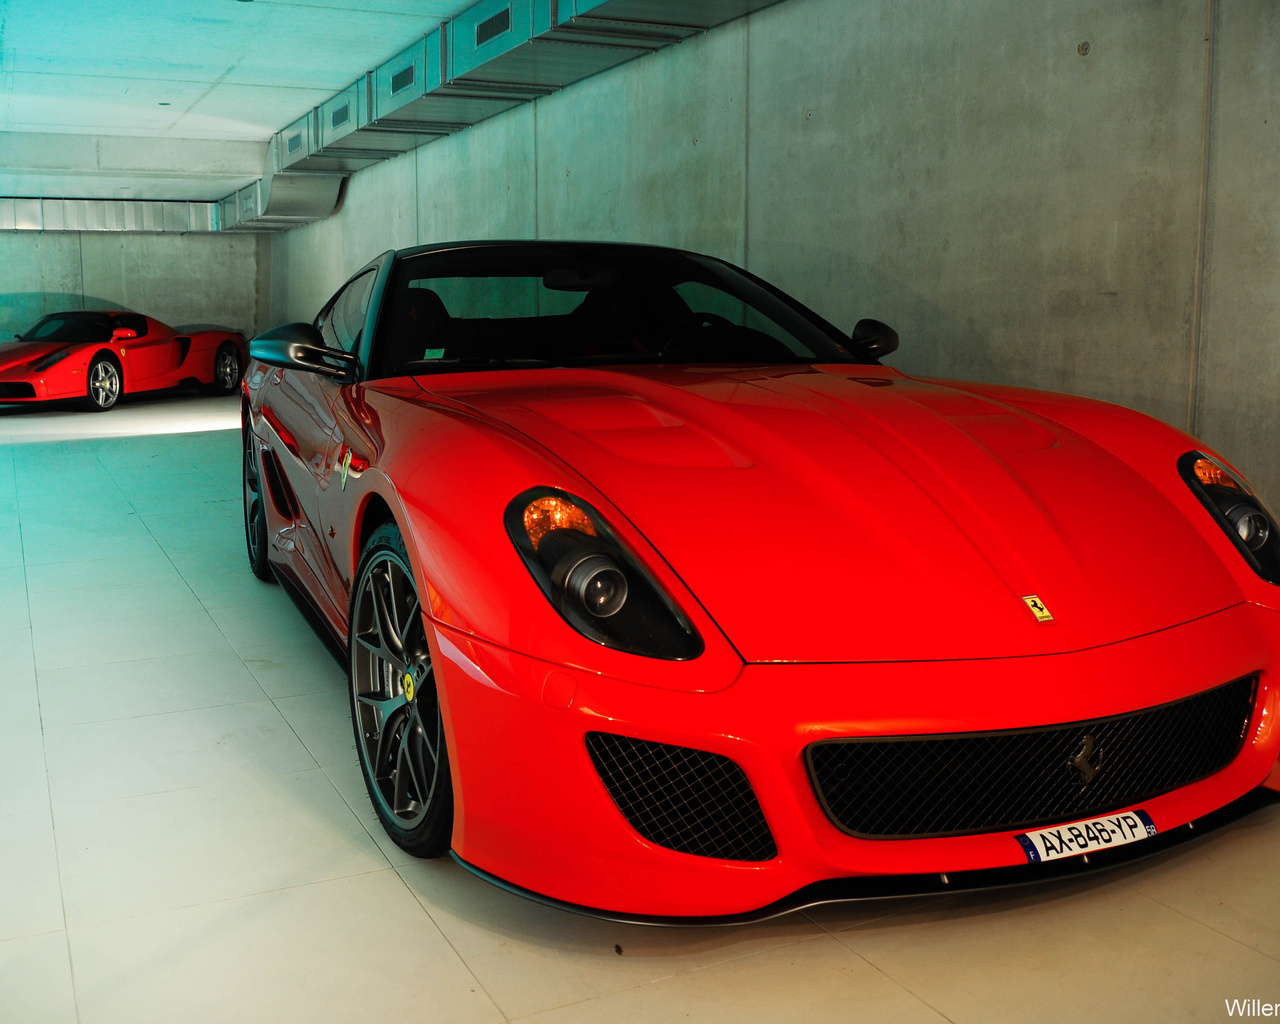 car, red, vehicle, house, tone, grey, nikon, sports car, ferrari, swimming, silver, rims, lightroom, performance car, hypercar, brakes, gto, enzo, two, wheel, twotone, 3, pool, supercar, collection, d40, 1855, v12, 599, combo, private, land vehicle, autom